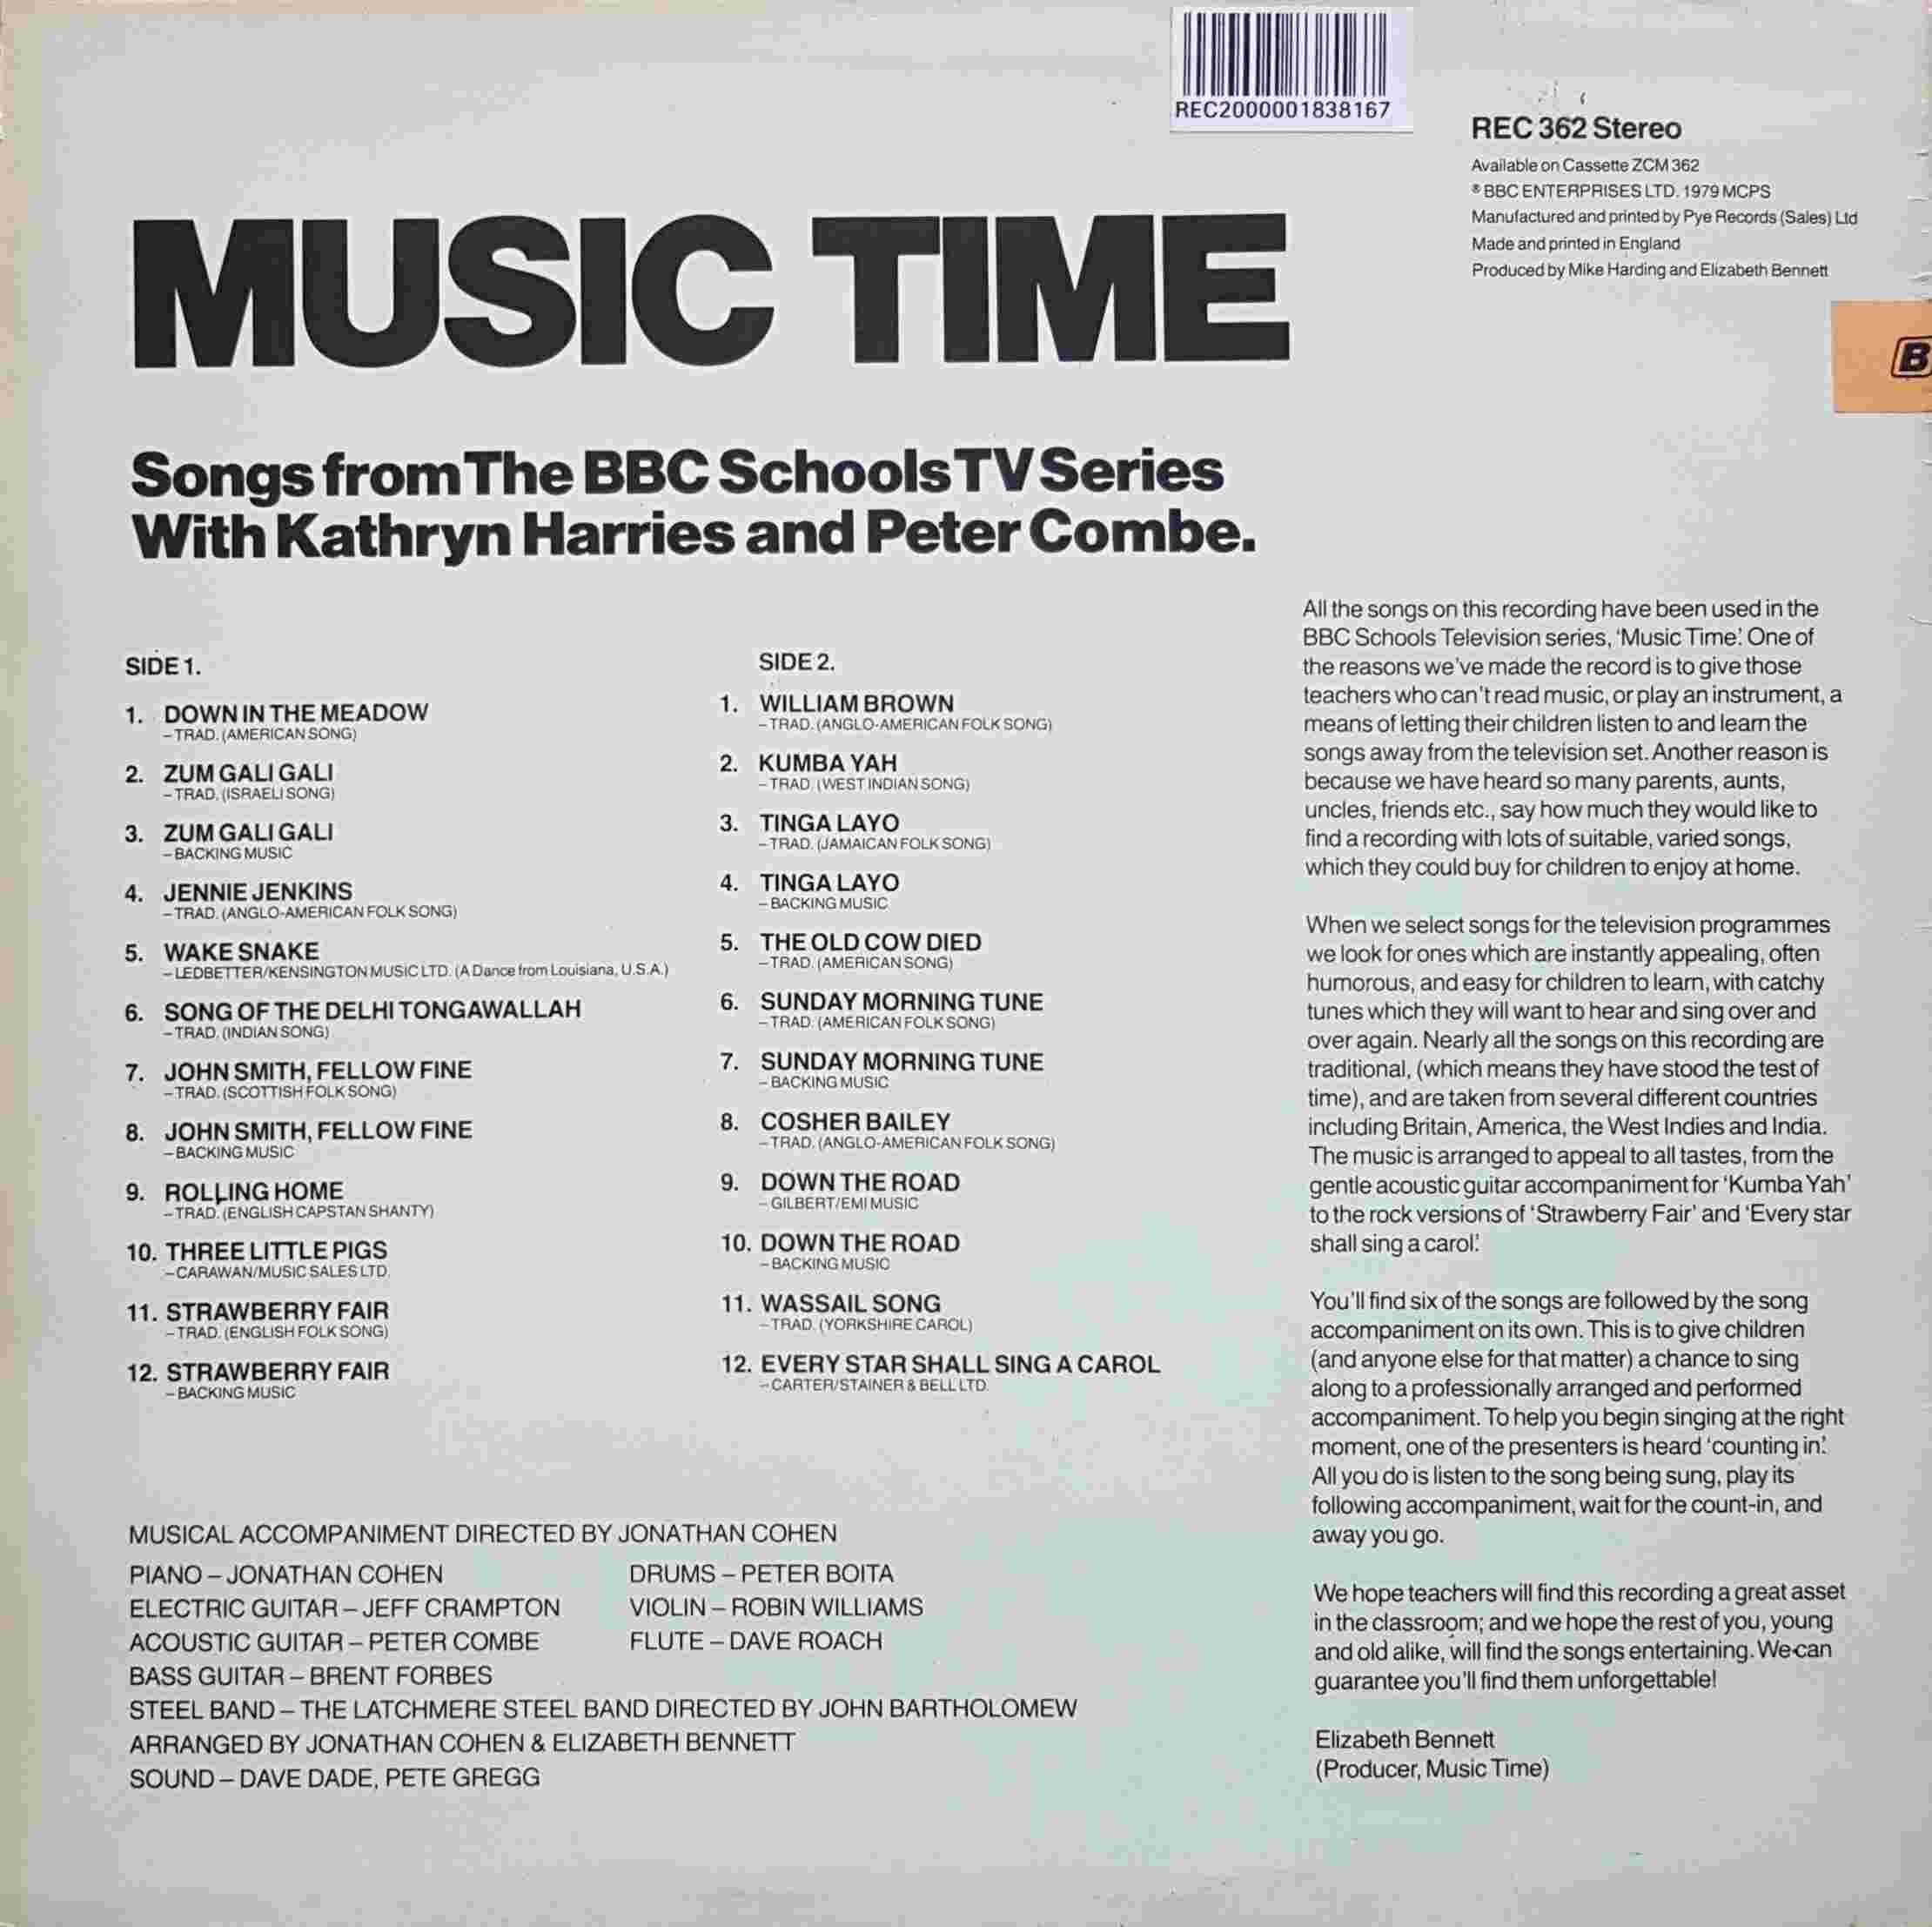 Picture of REC 362 Music time by artist Various / Kathryn Harries / Peter Combe from the BBC records and Tapes library